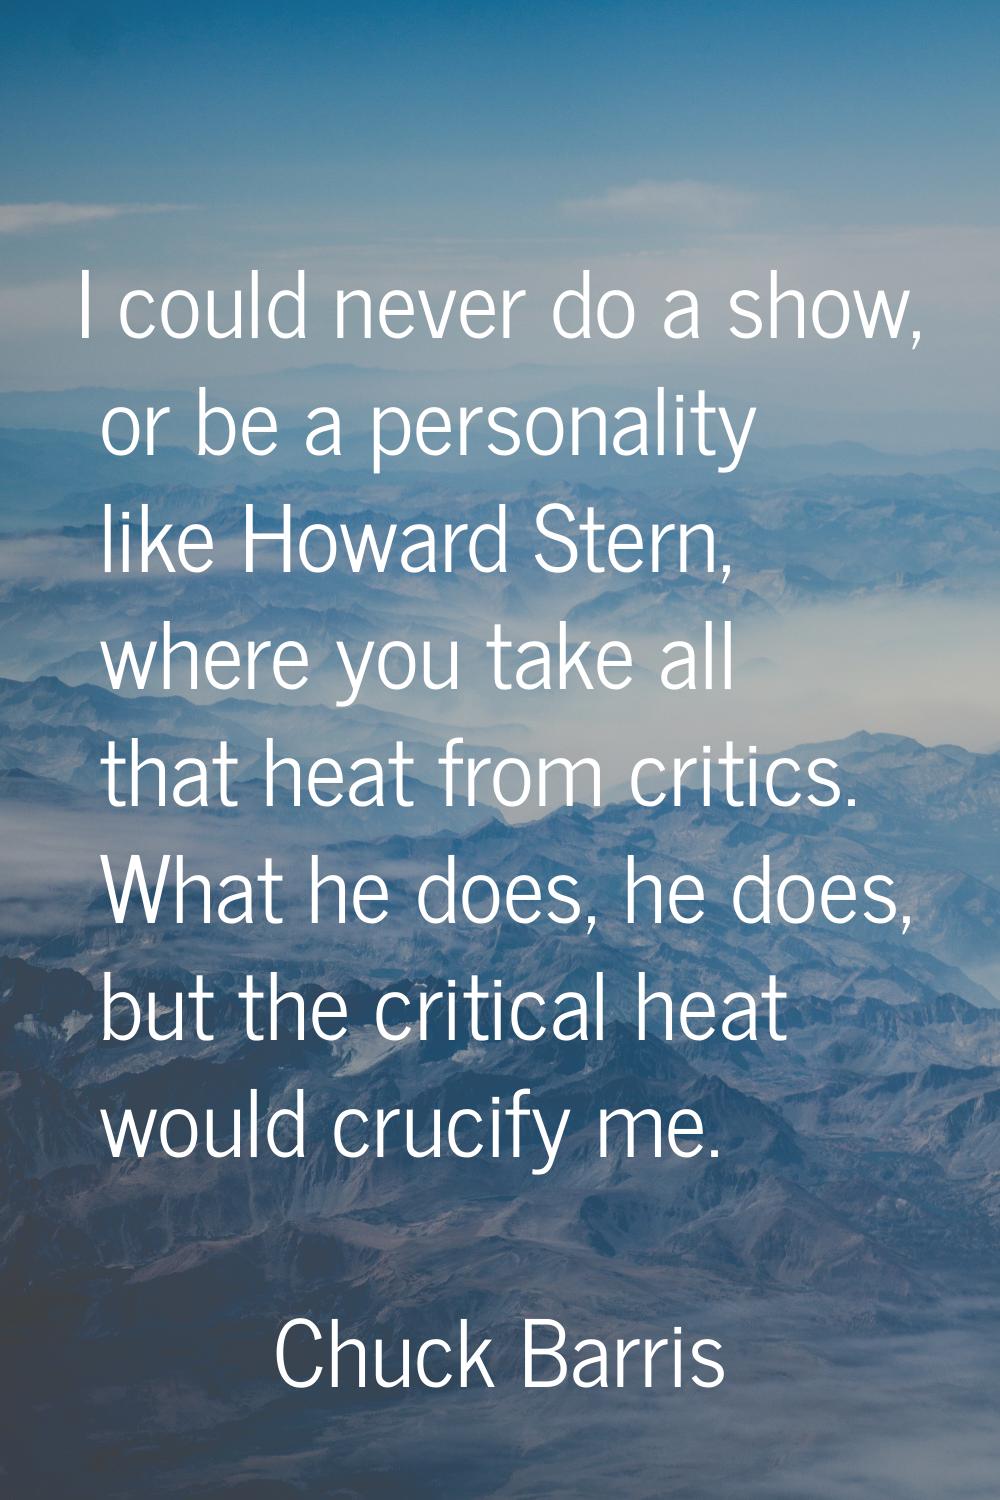 I could never do a show, or be a personality like Howard Stern, where you take all that heat from c